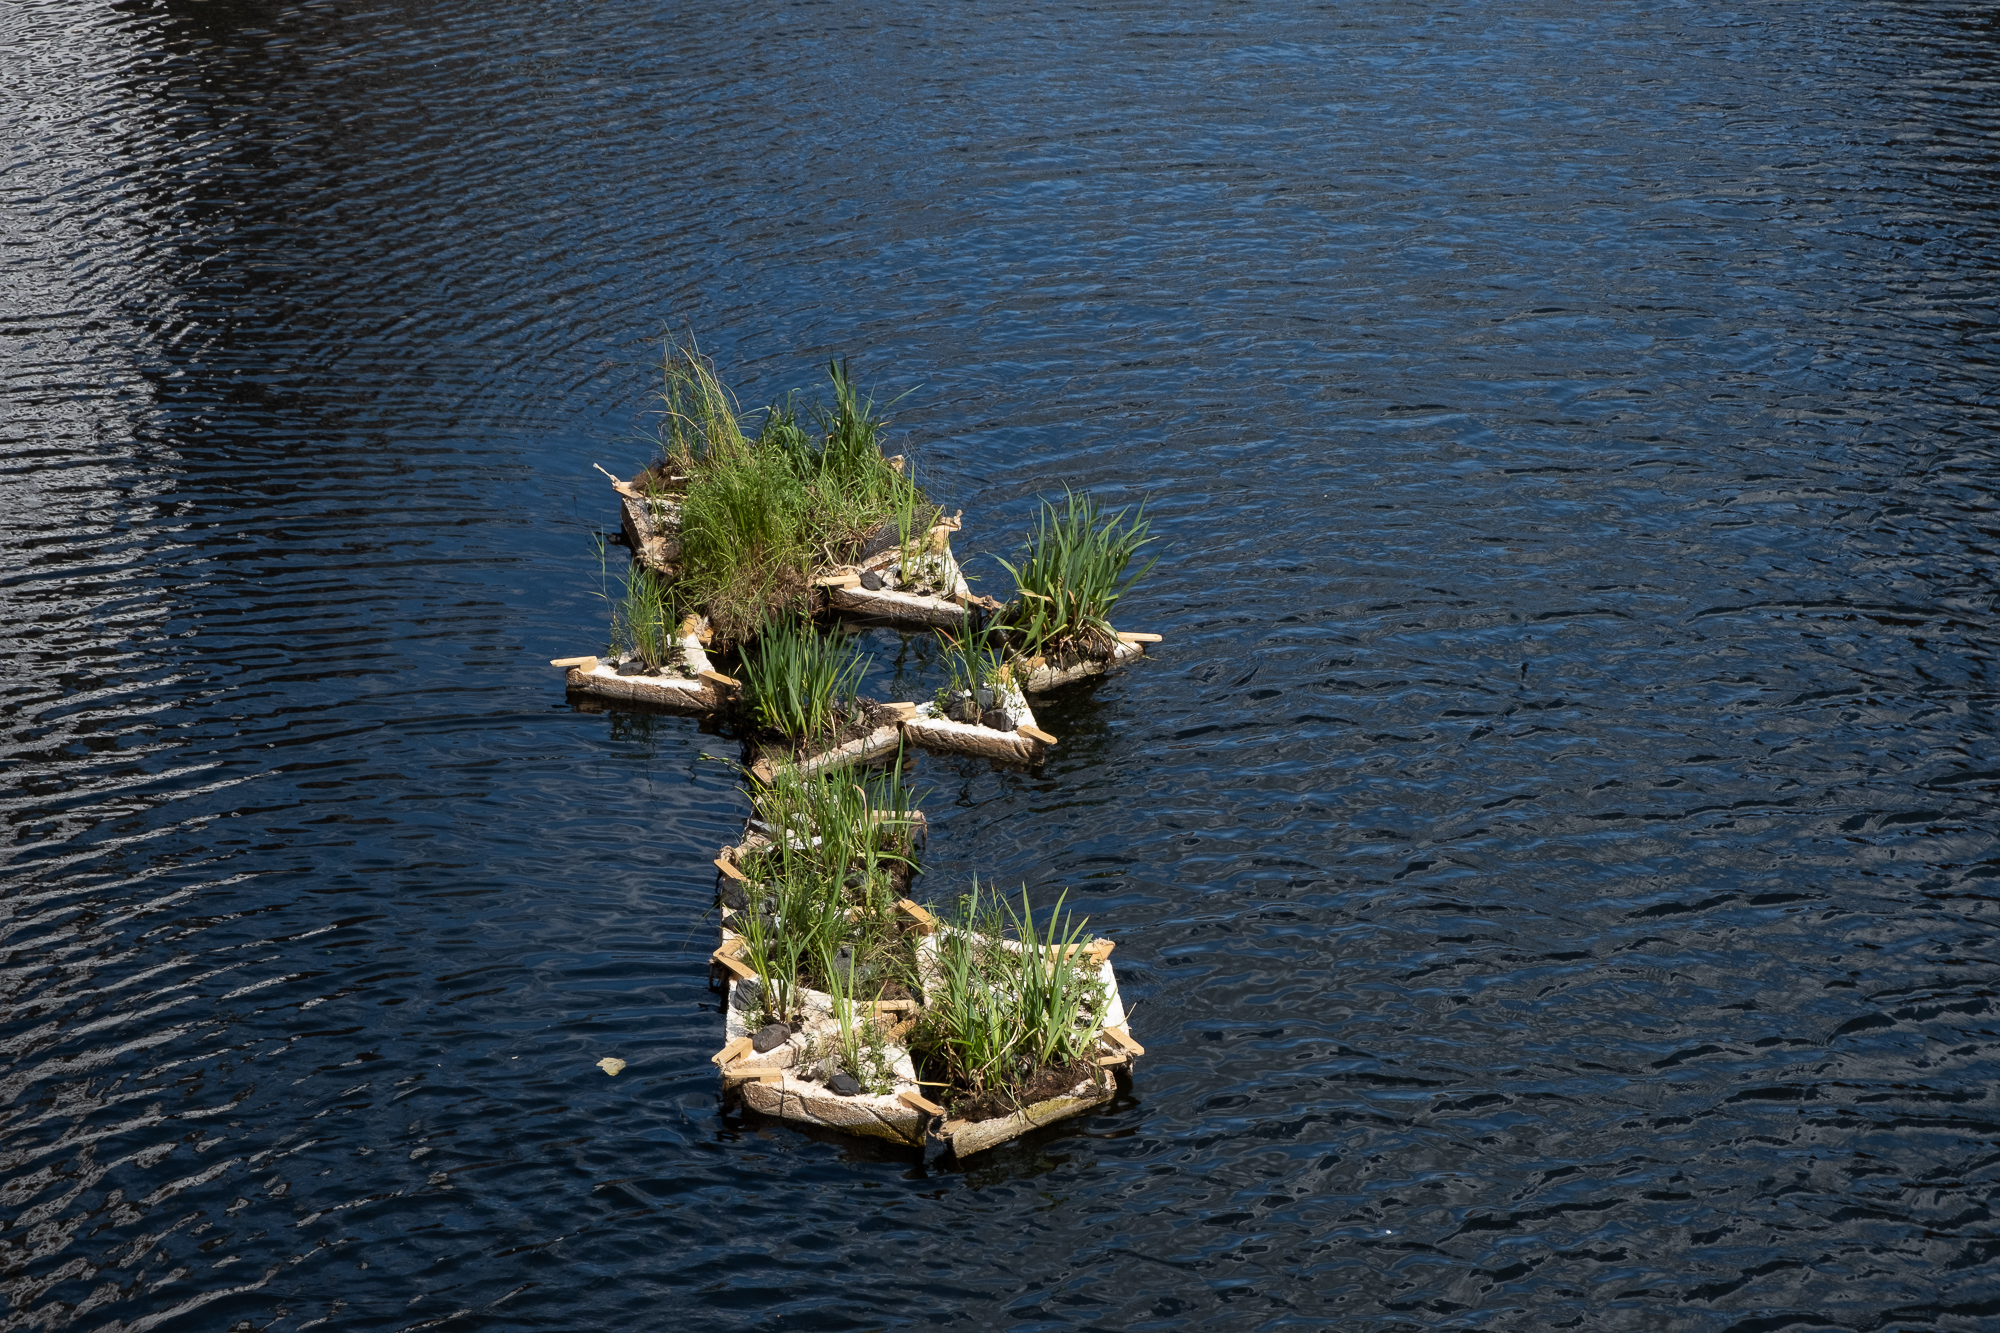 The photo shows a compilation of 19 triangular floating islands upon which plants are growing. 